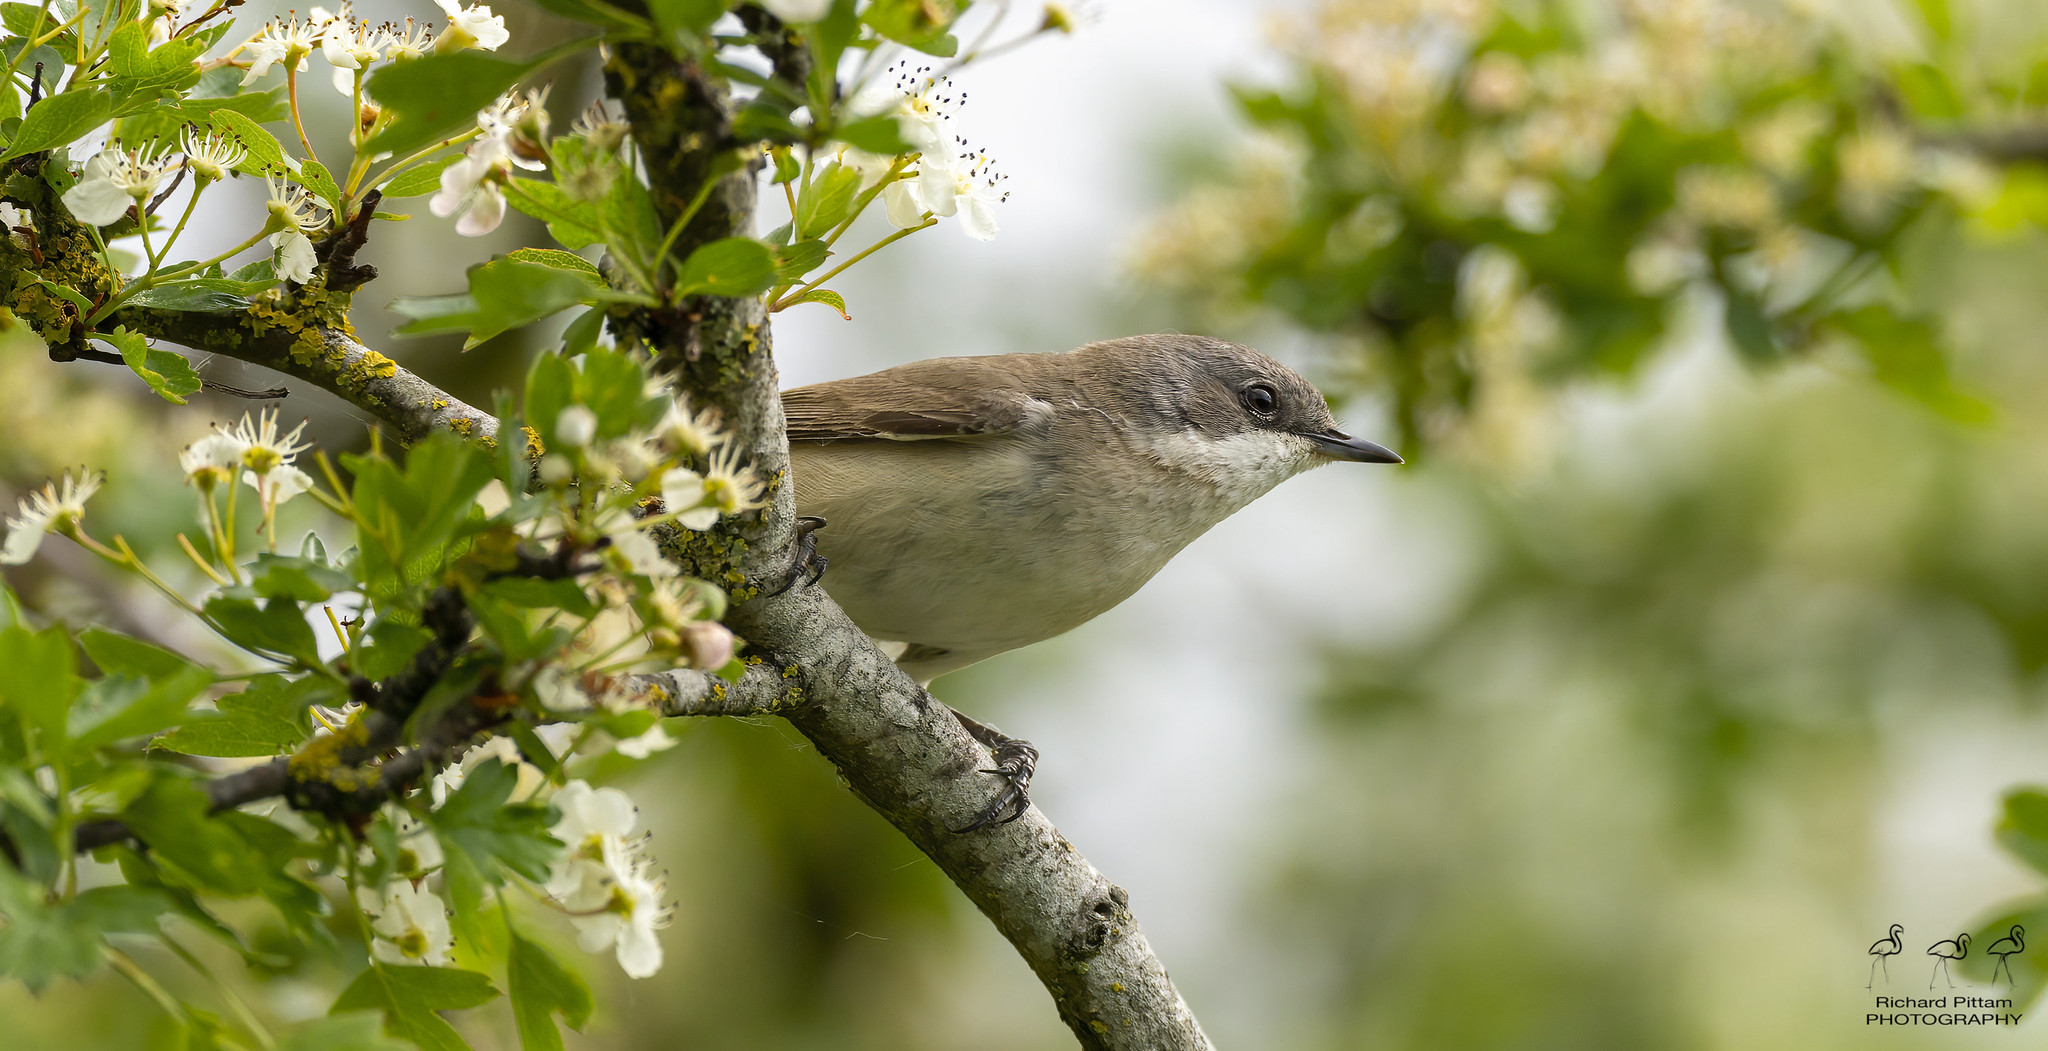 Common Whitethroat - what do you want?